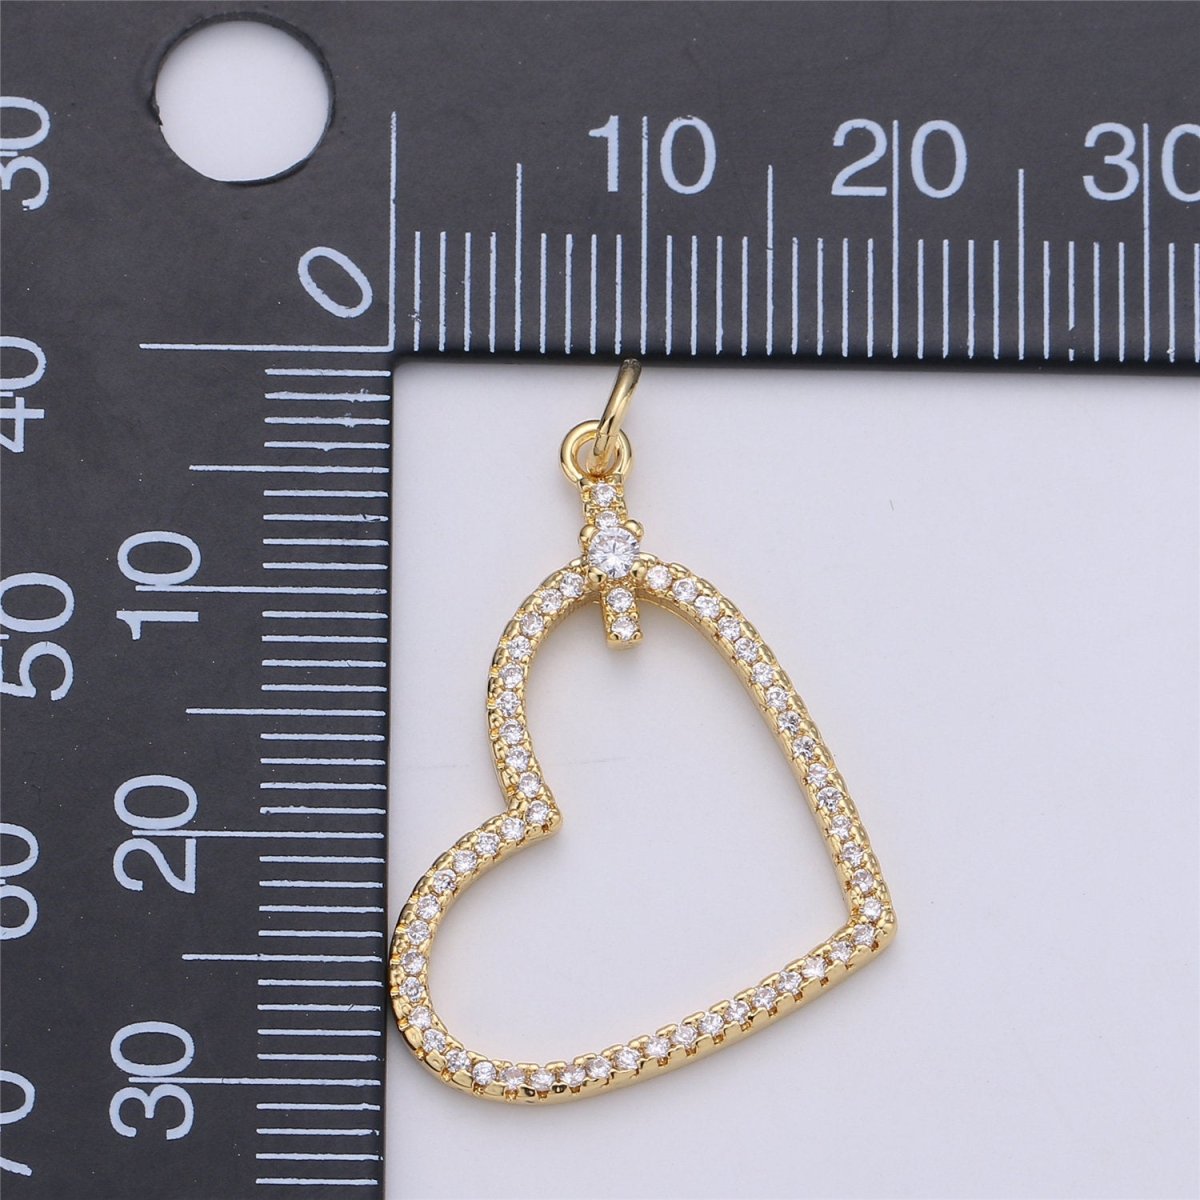 Dainty Cubic Micro Pave Hanging Heart Pendant Love Charm for Necklace Earring Bracelet Component C-736 - DLUXCA